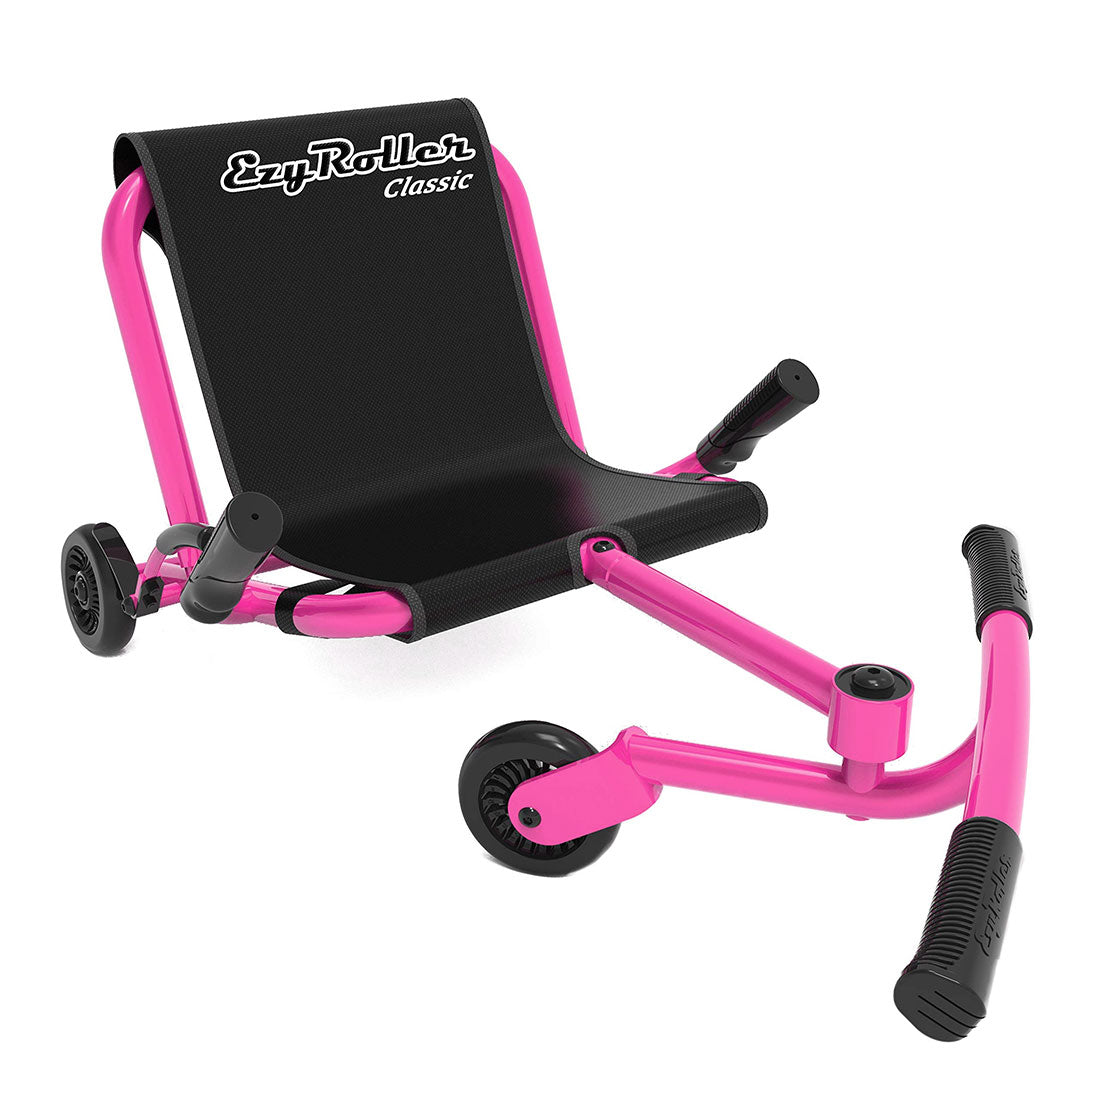 EzyRoller Classic - Pink Other Fun Toys